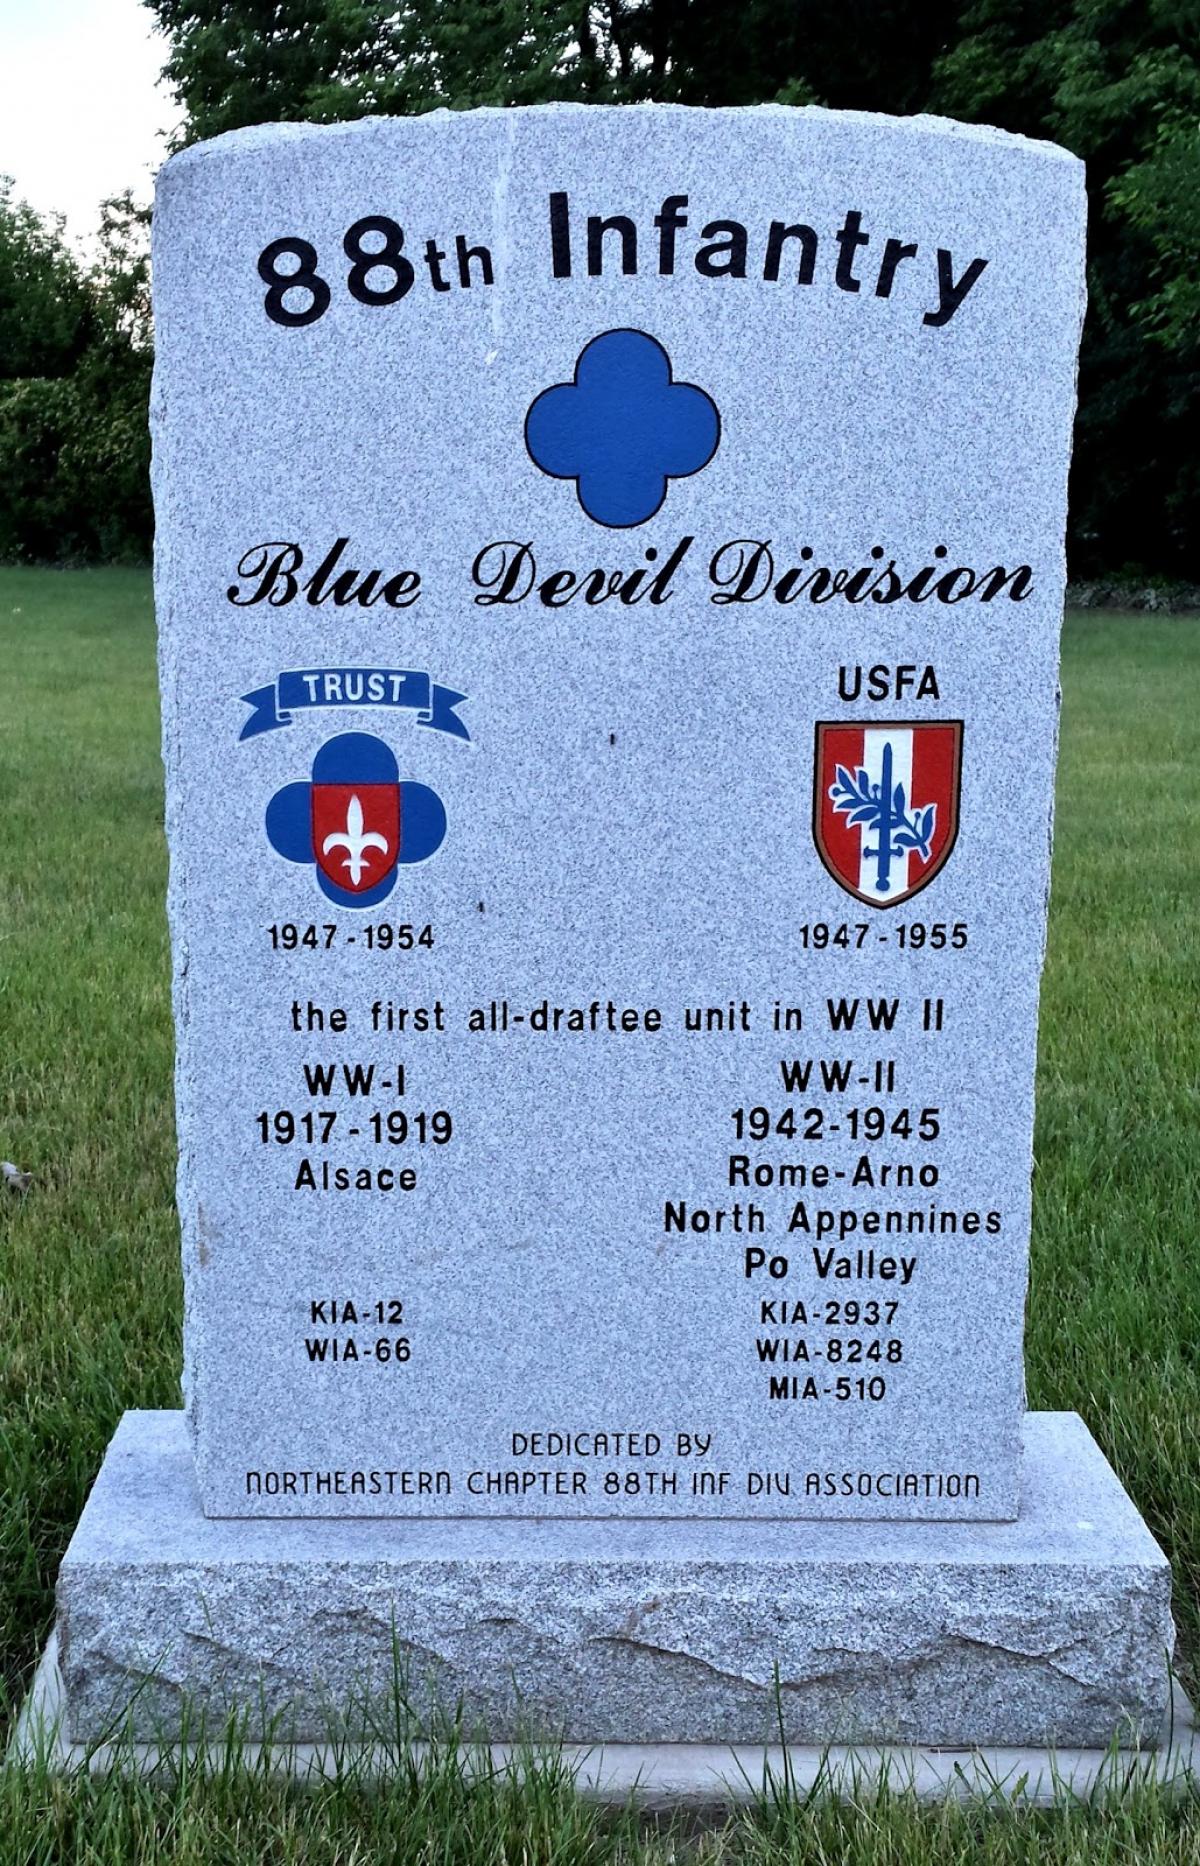 OK, Grove, Headstone Symbols and Meanings, U. S. Army 88th Infantry Division (Blue Devils)